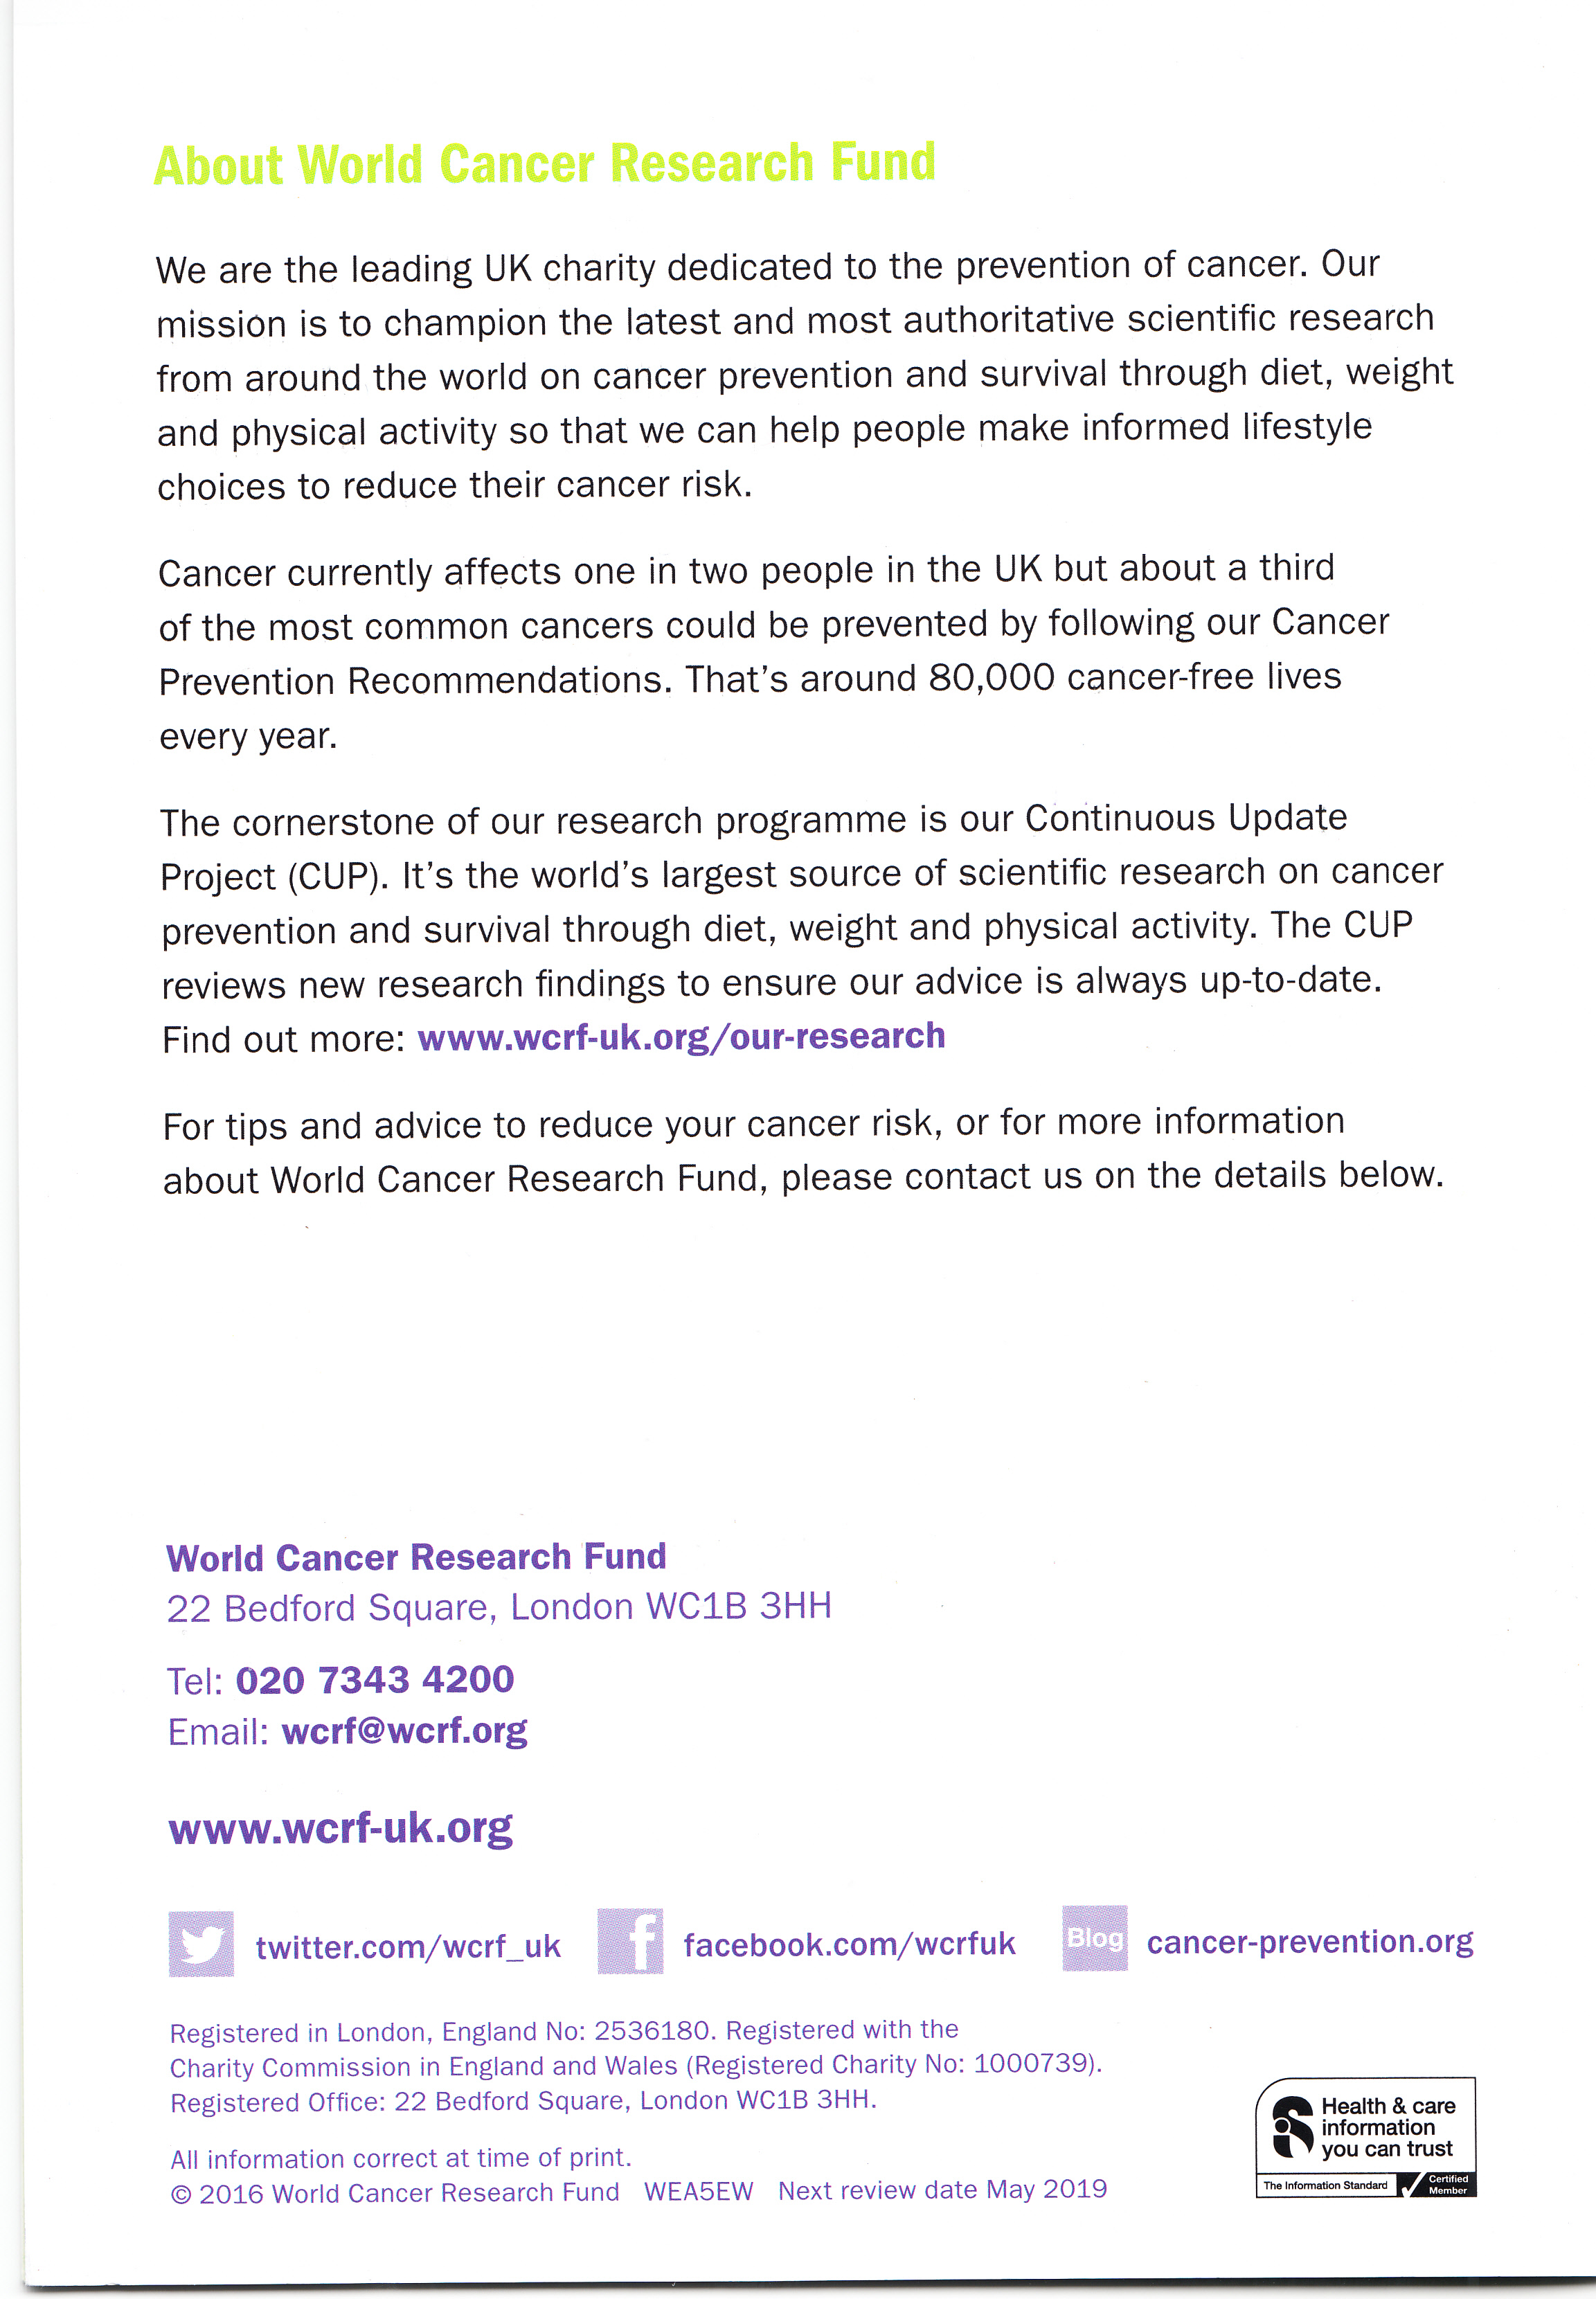 About world cancer research fund_0002